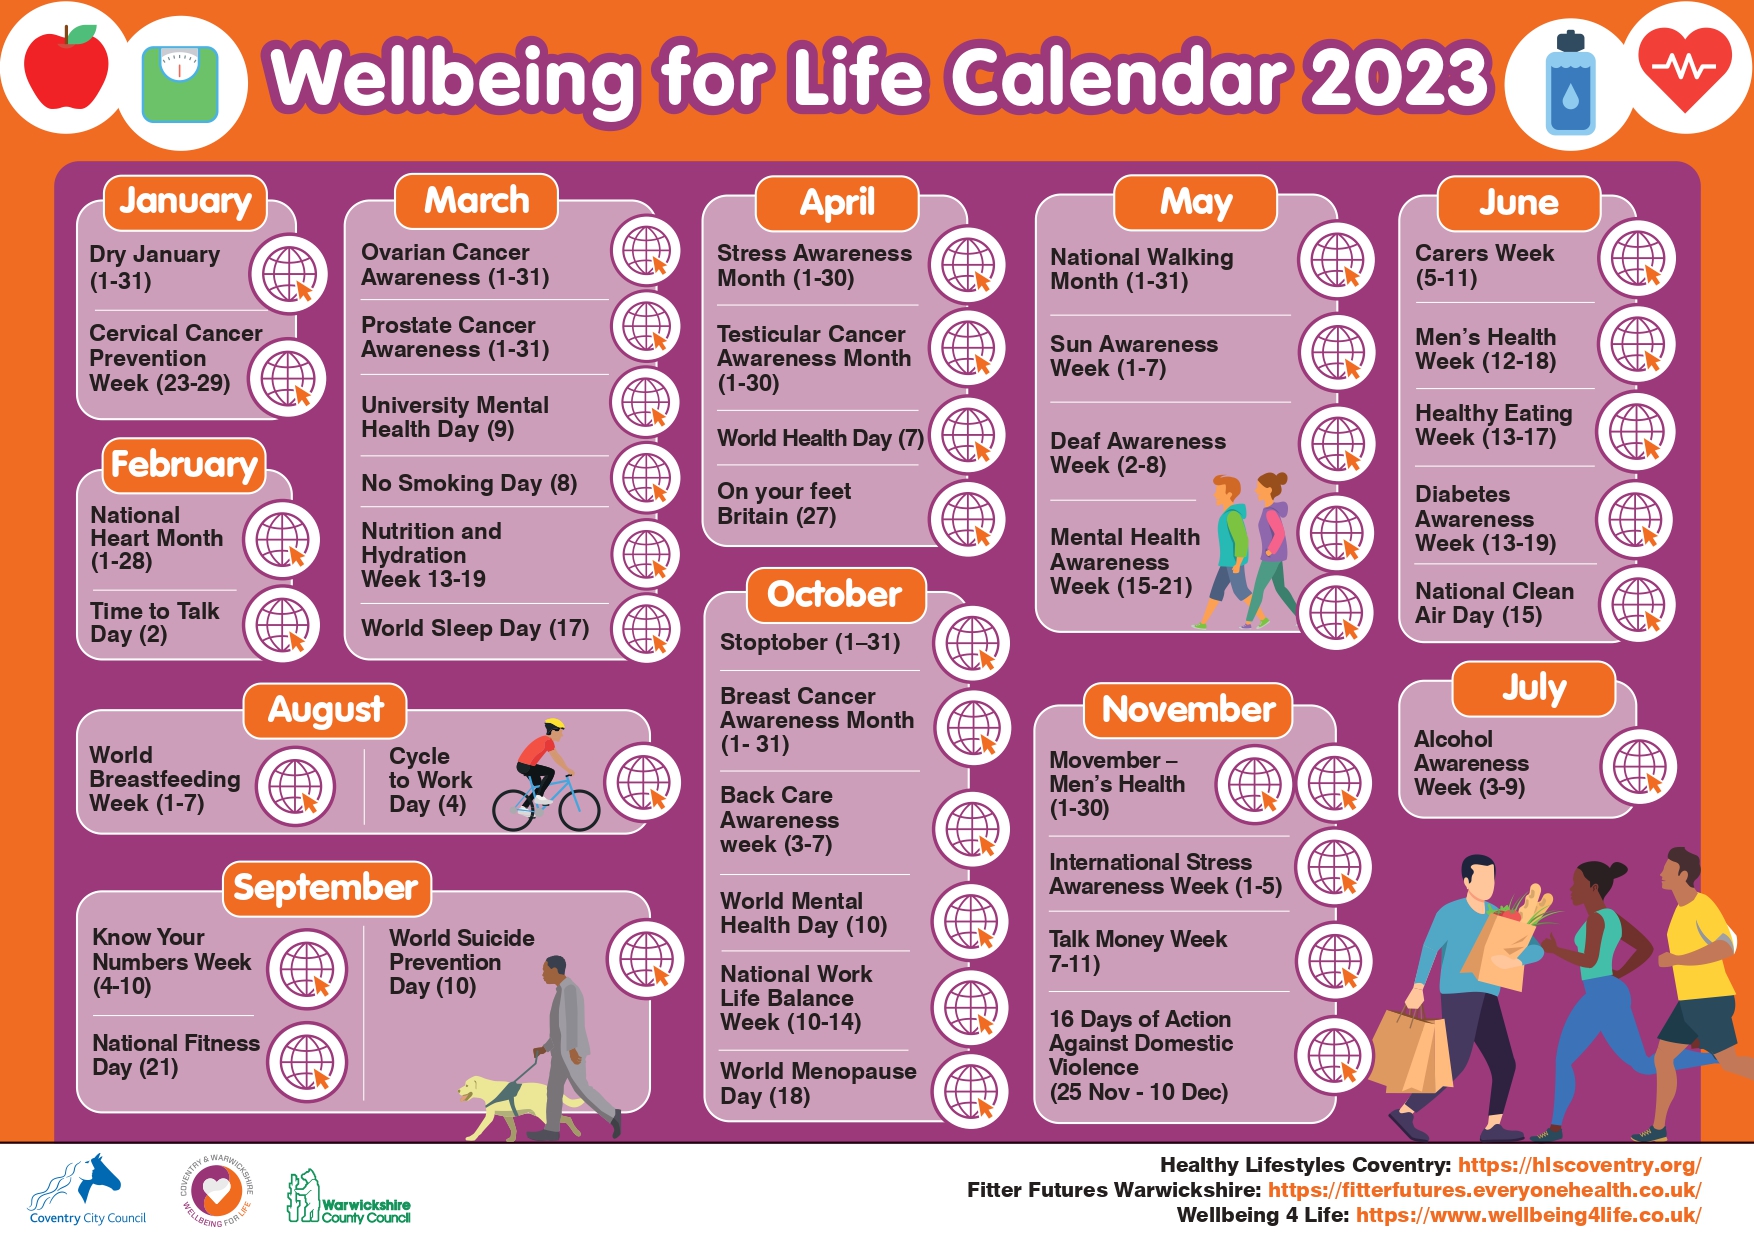 Wellbeing events calendar Wellbeing for life